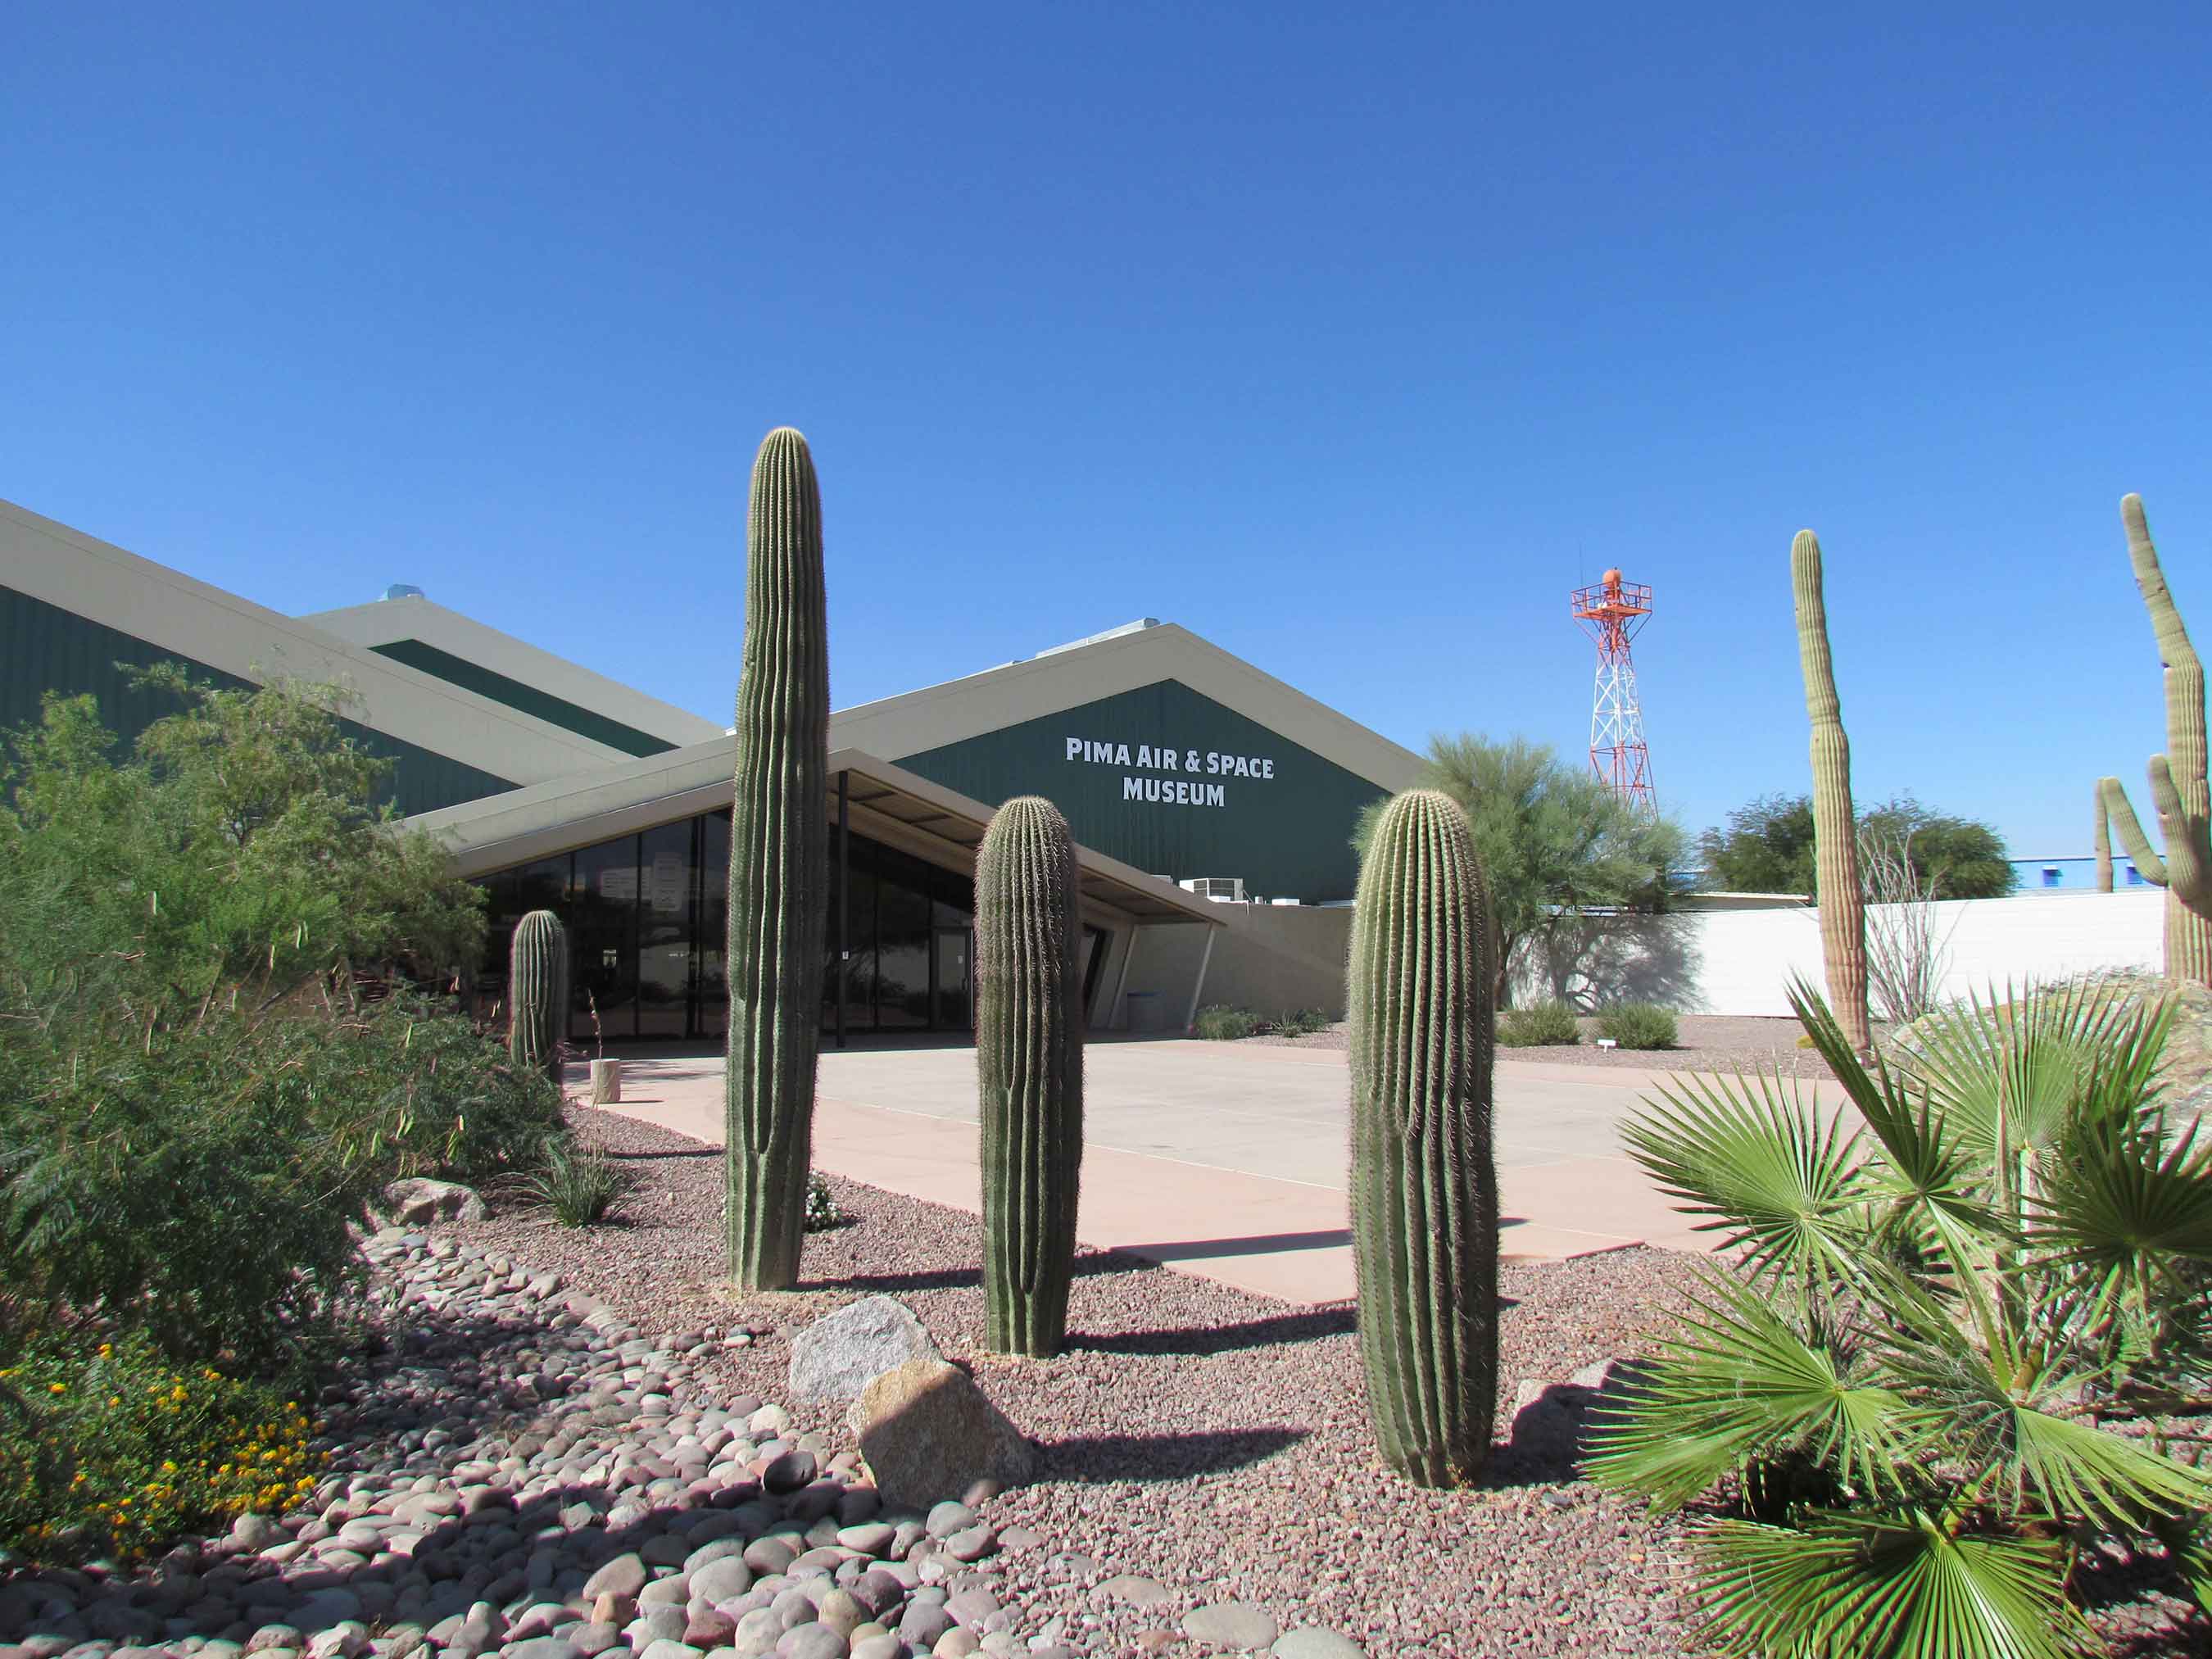 Pima Air and Space Museum in Tucson, AZ is among the top 10 U.S. space-themed attractions, according to TripAdvisor. (A TripAdvisor traveler photo)